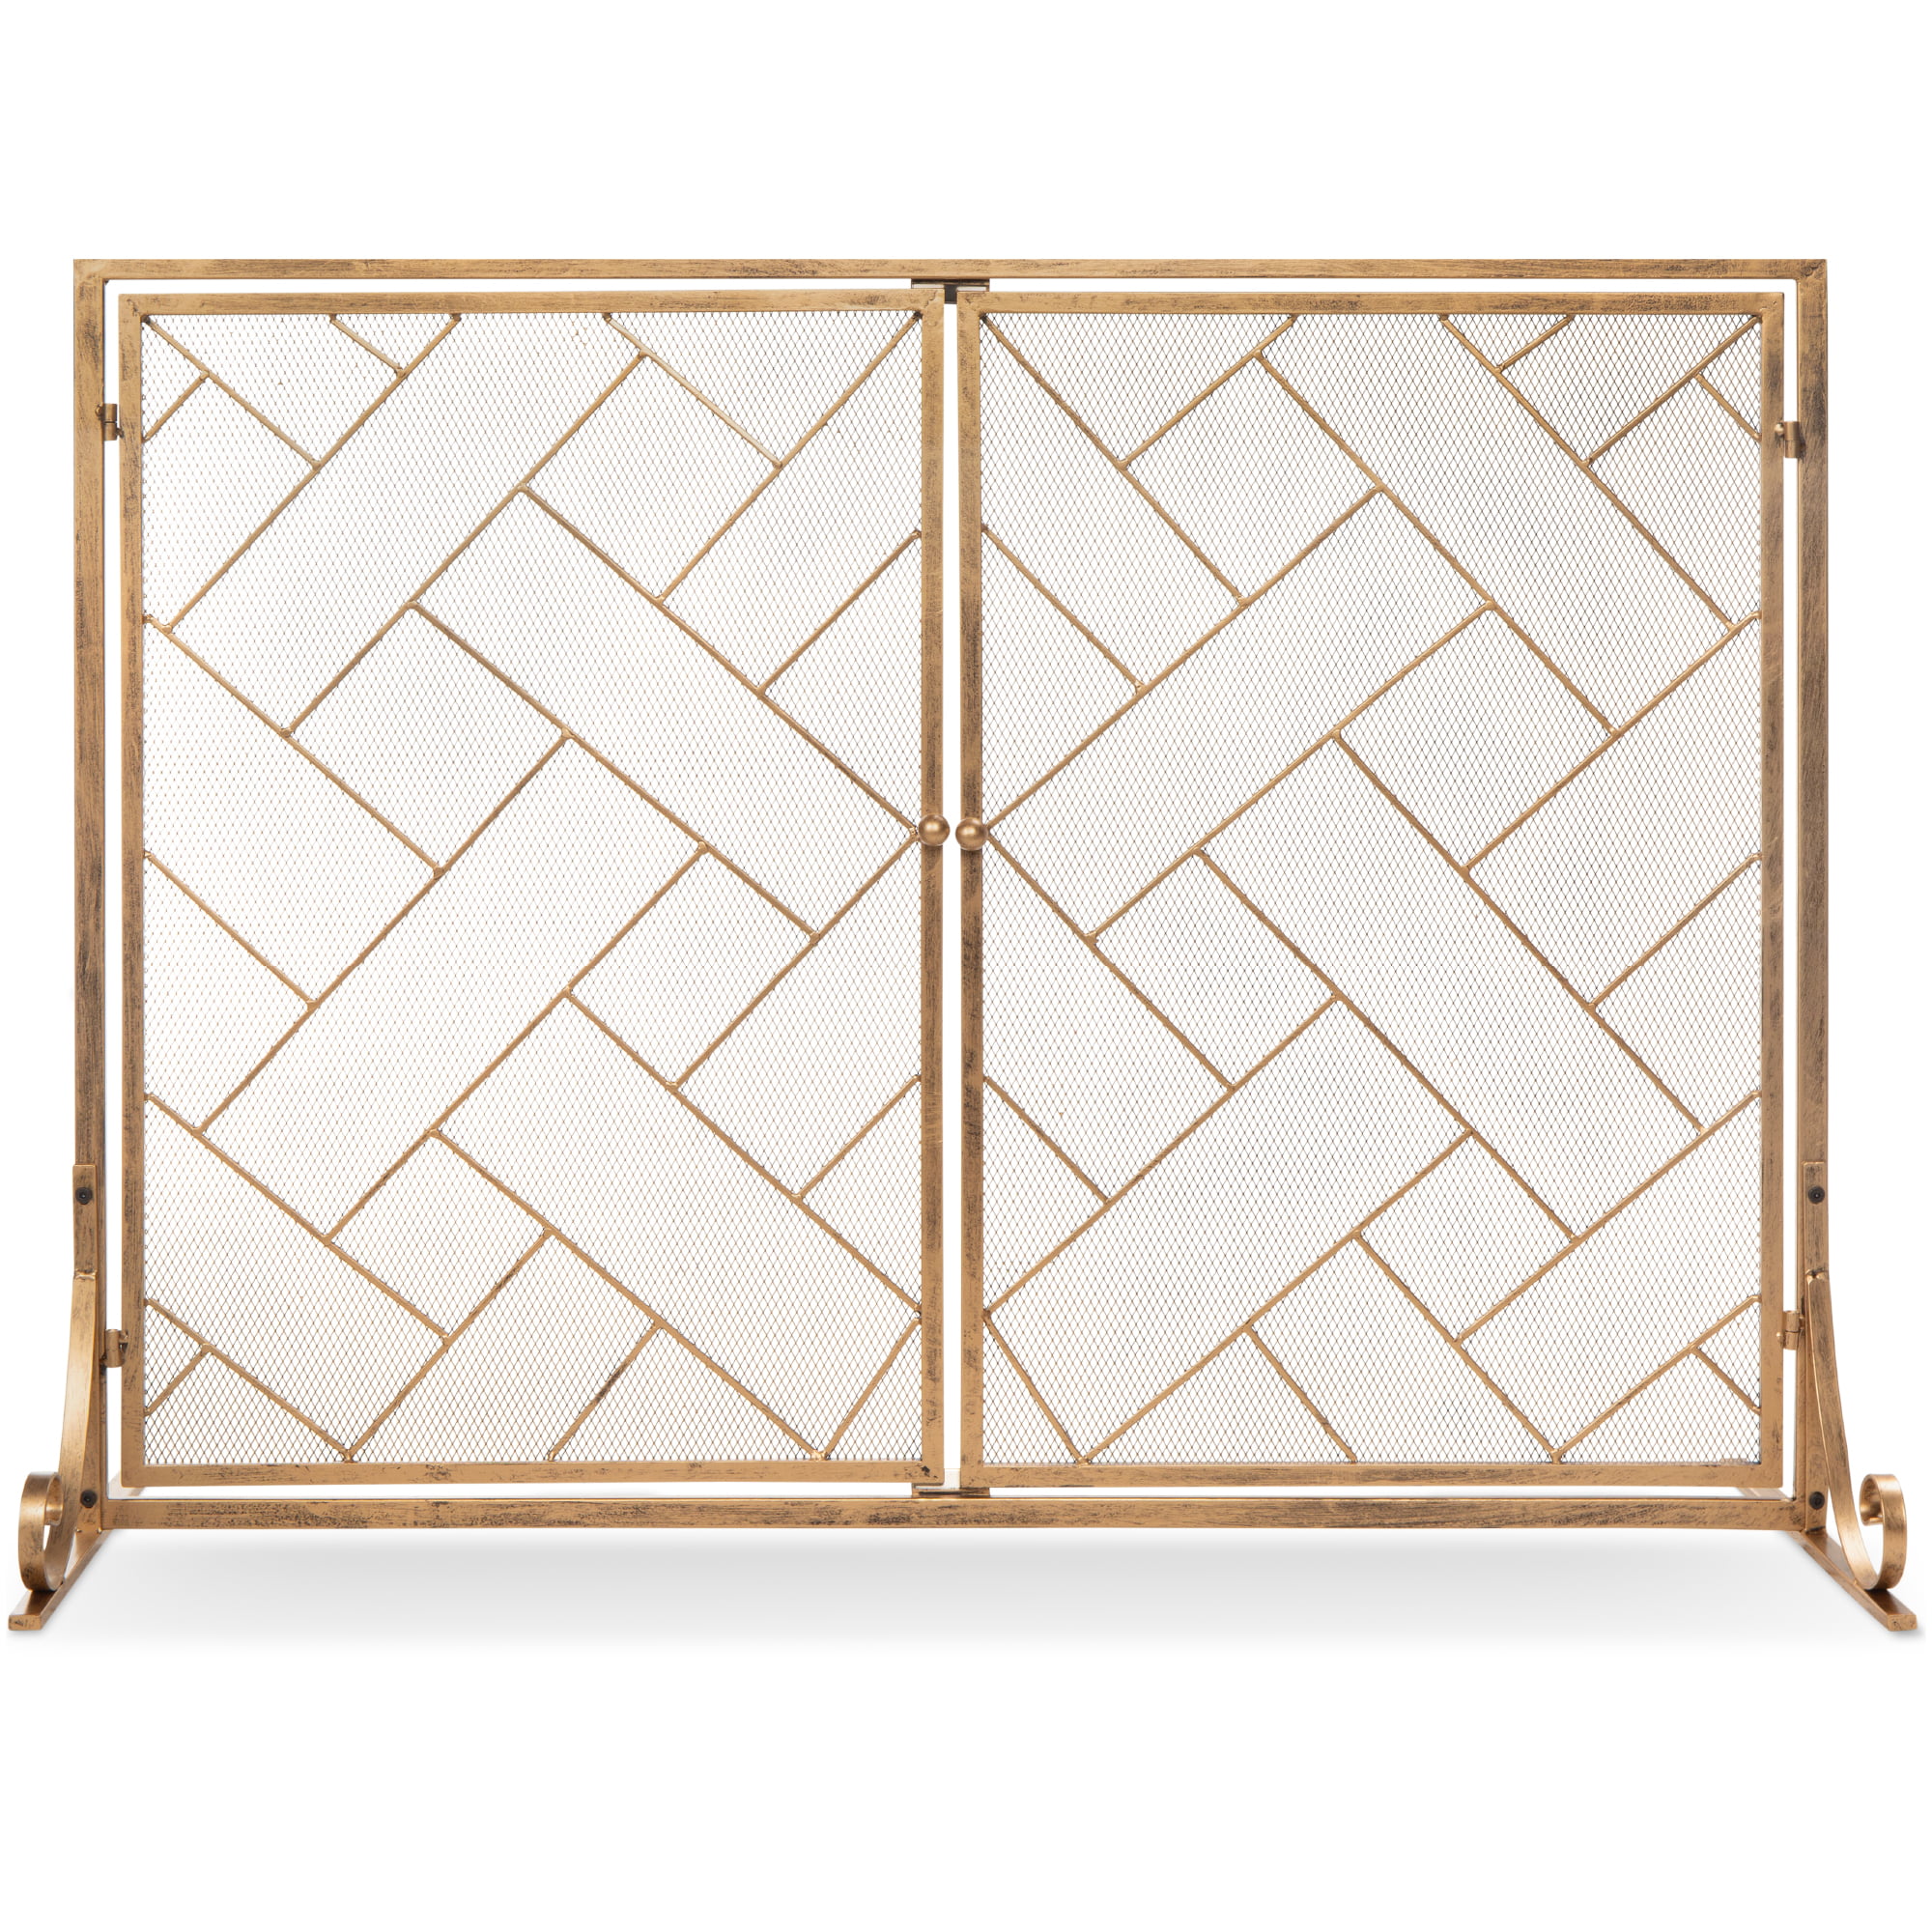 Best Choice Products 44x33in 2-Panel Handcrafted Wrought Iron Geometric Fireplace Screen with Magnetic Doors - Gold